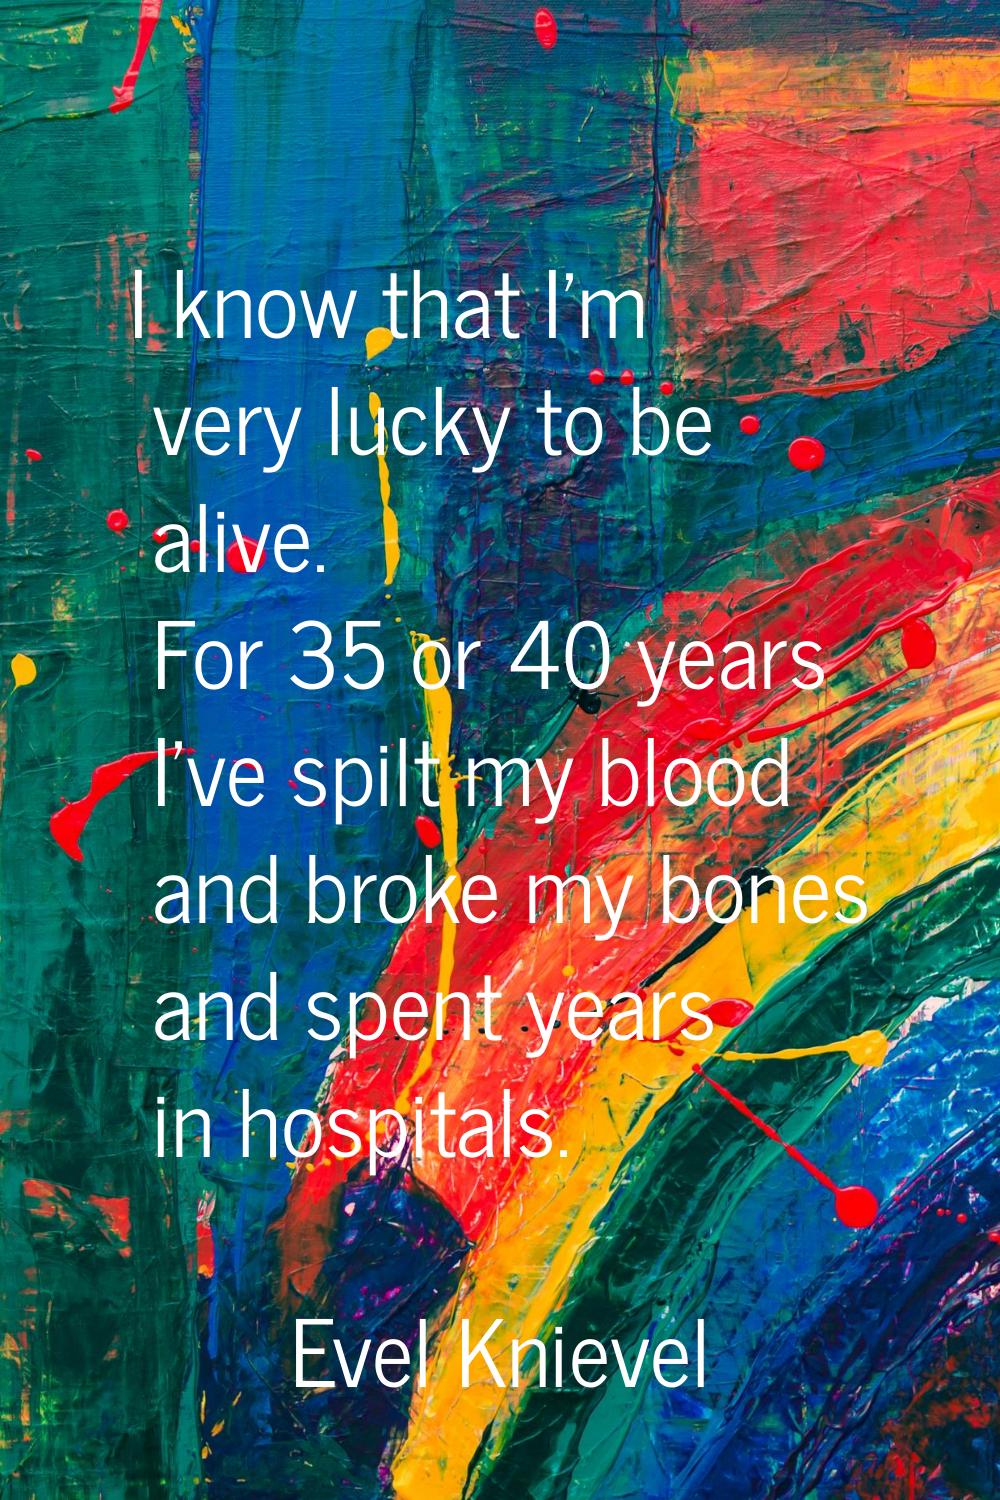 I know that I'm very lucky to be alive. For 35 or 40 years I've spilt my blood and broke my bones a